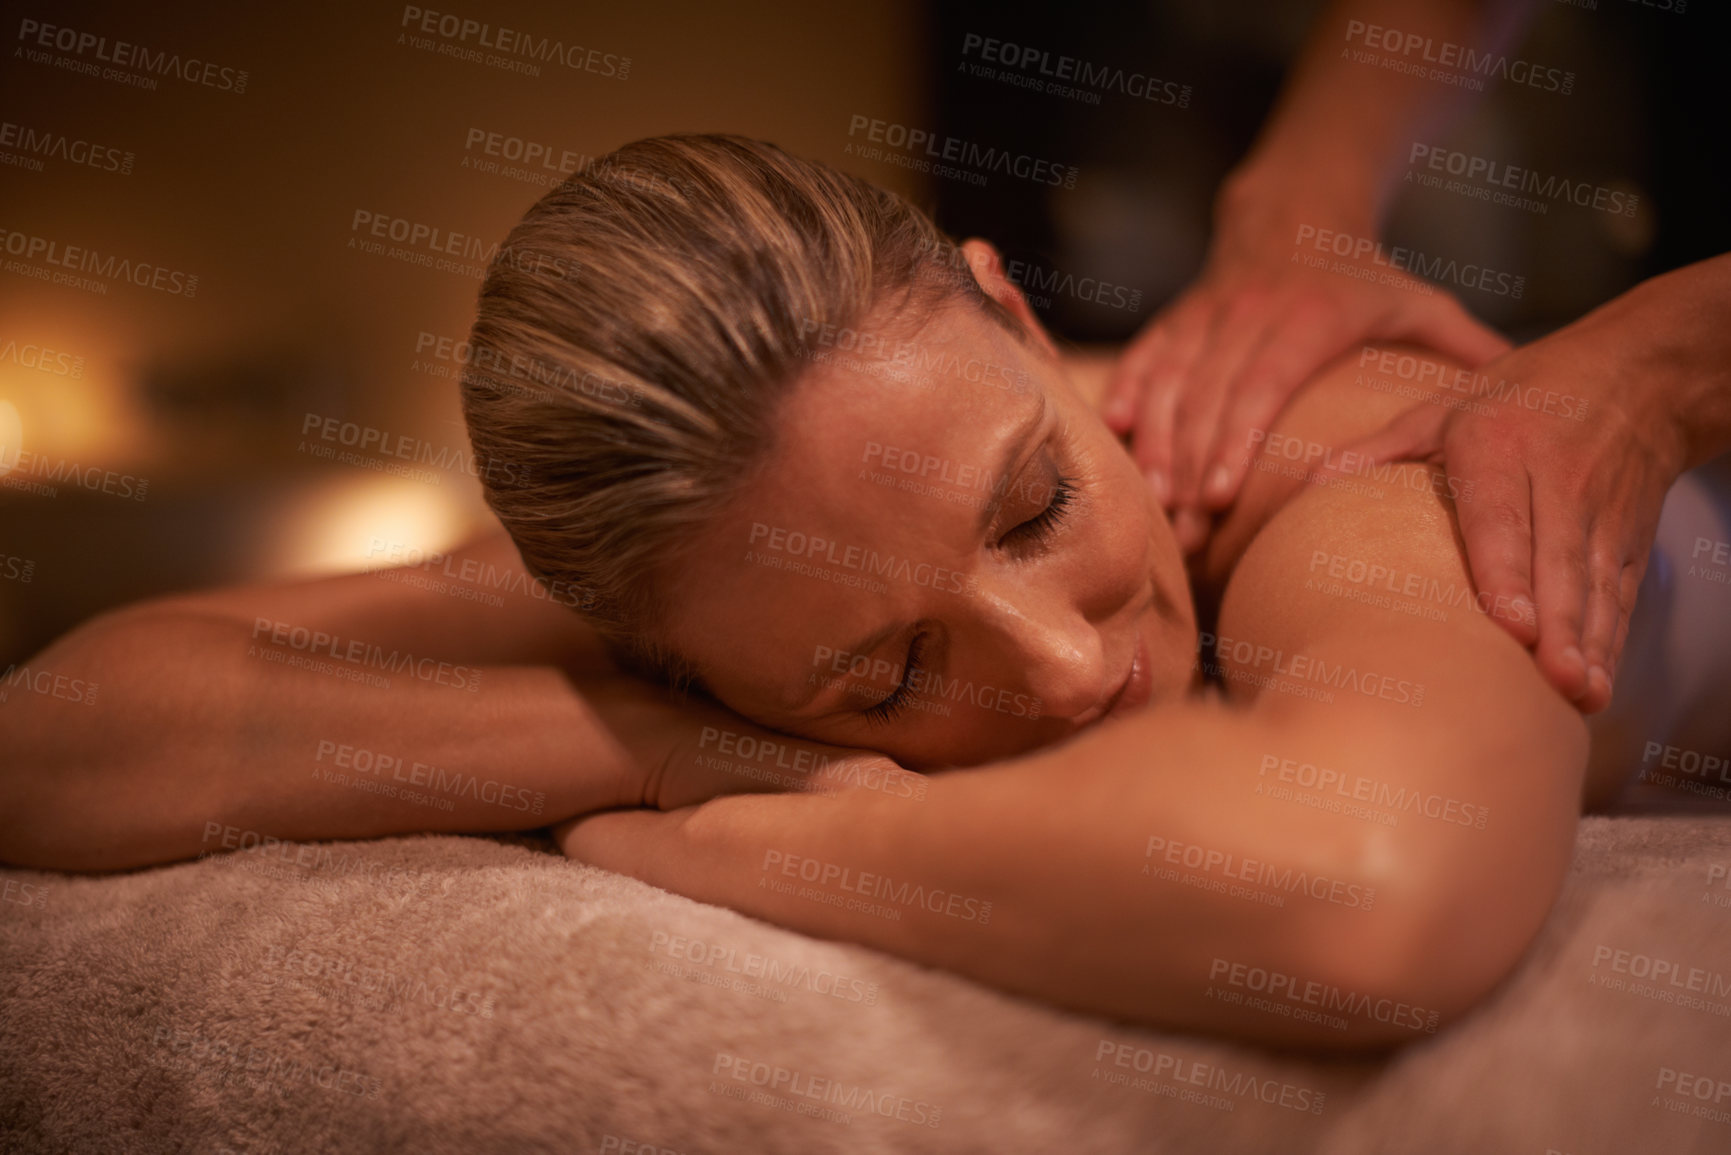 Buy stock photo Cropped shot of a woman in a day spa getting a massage